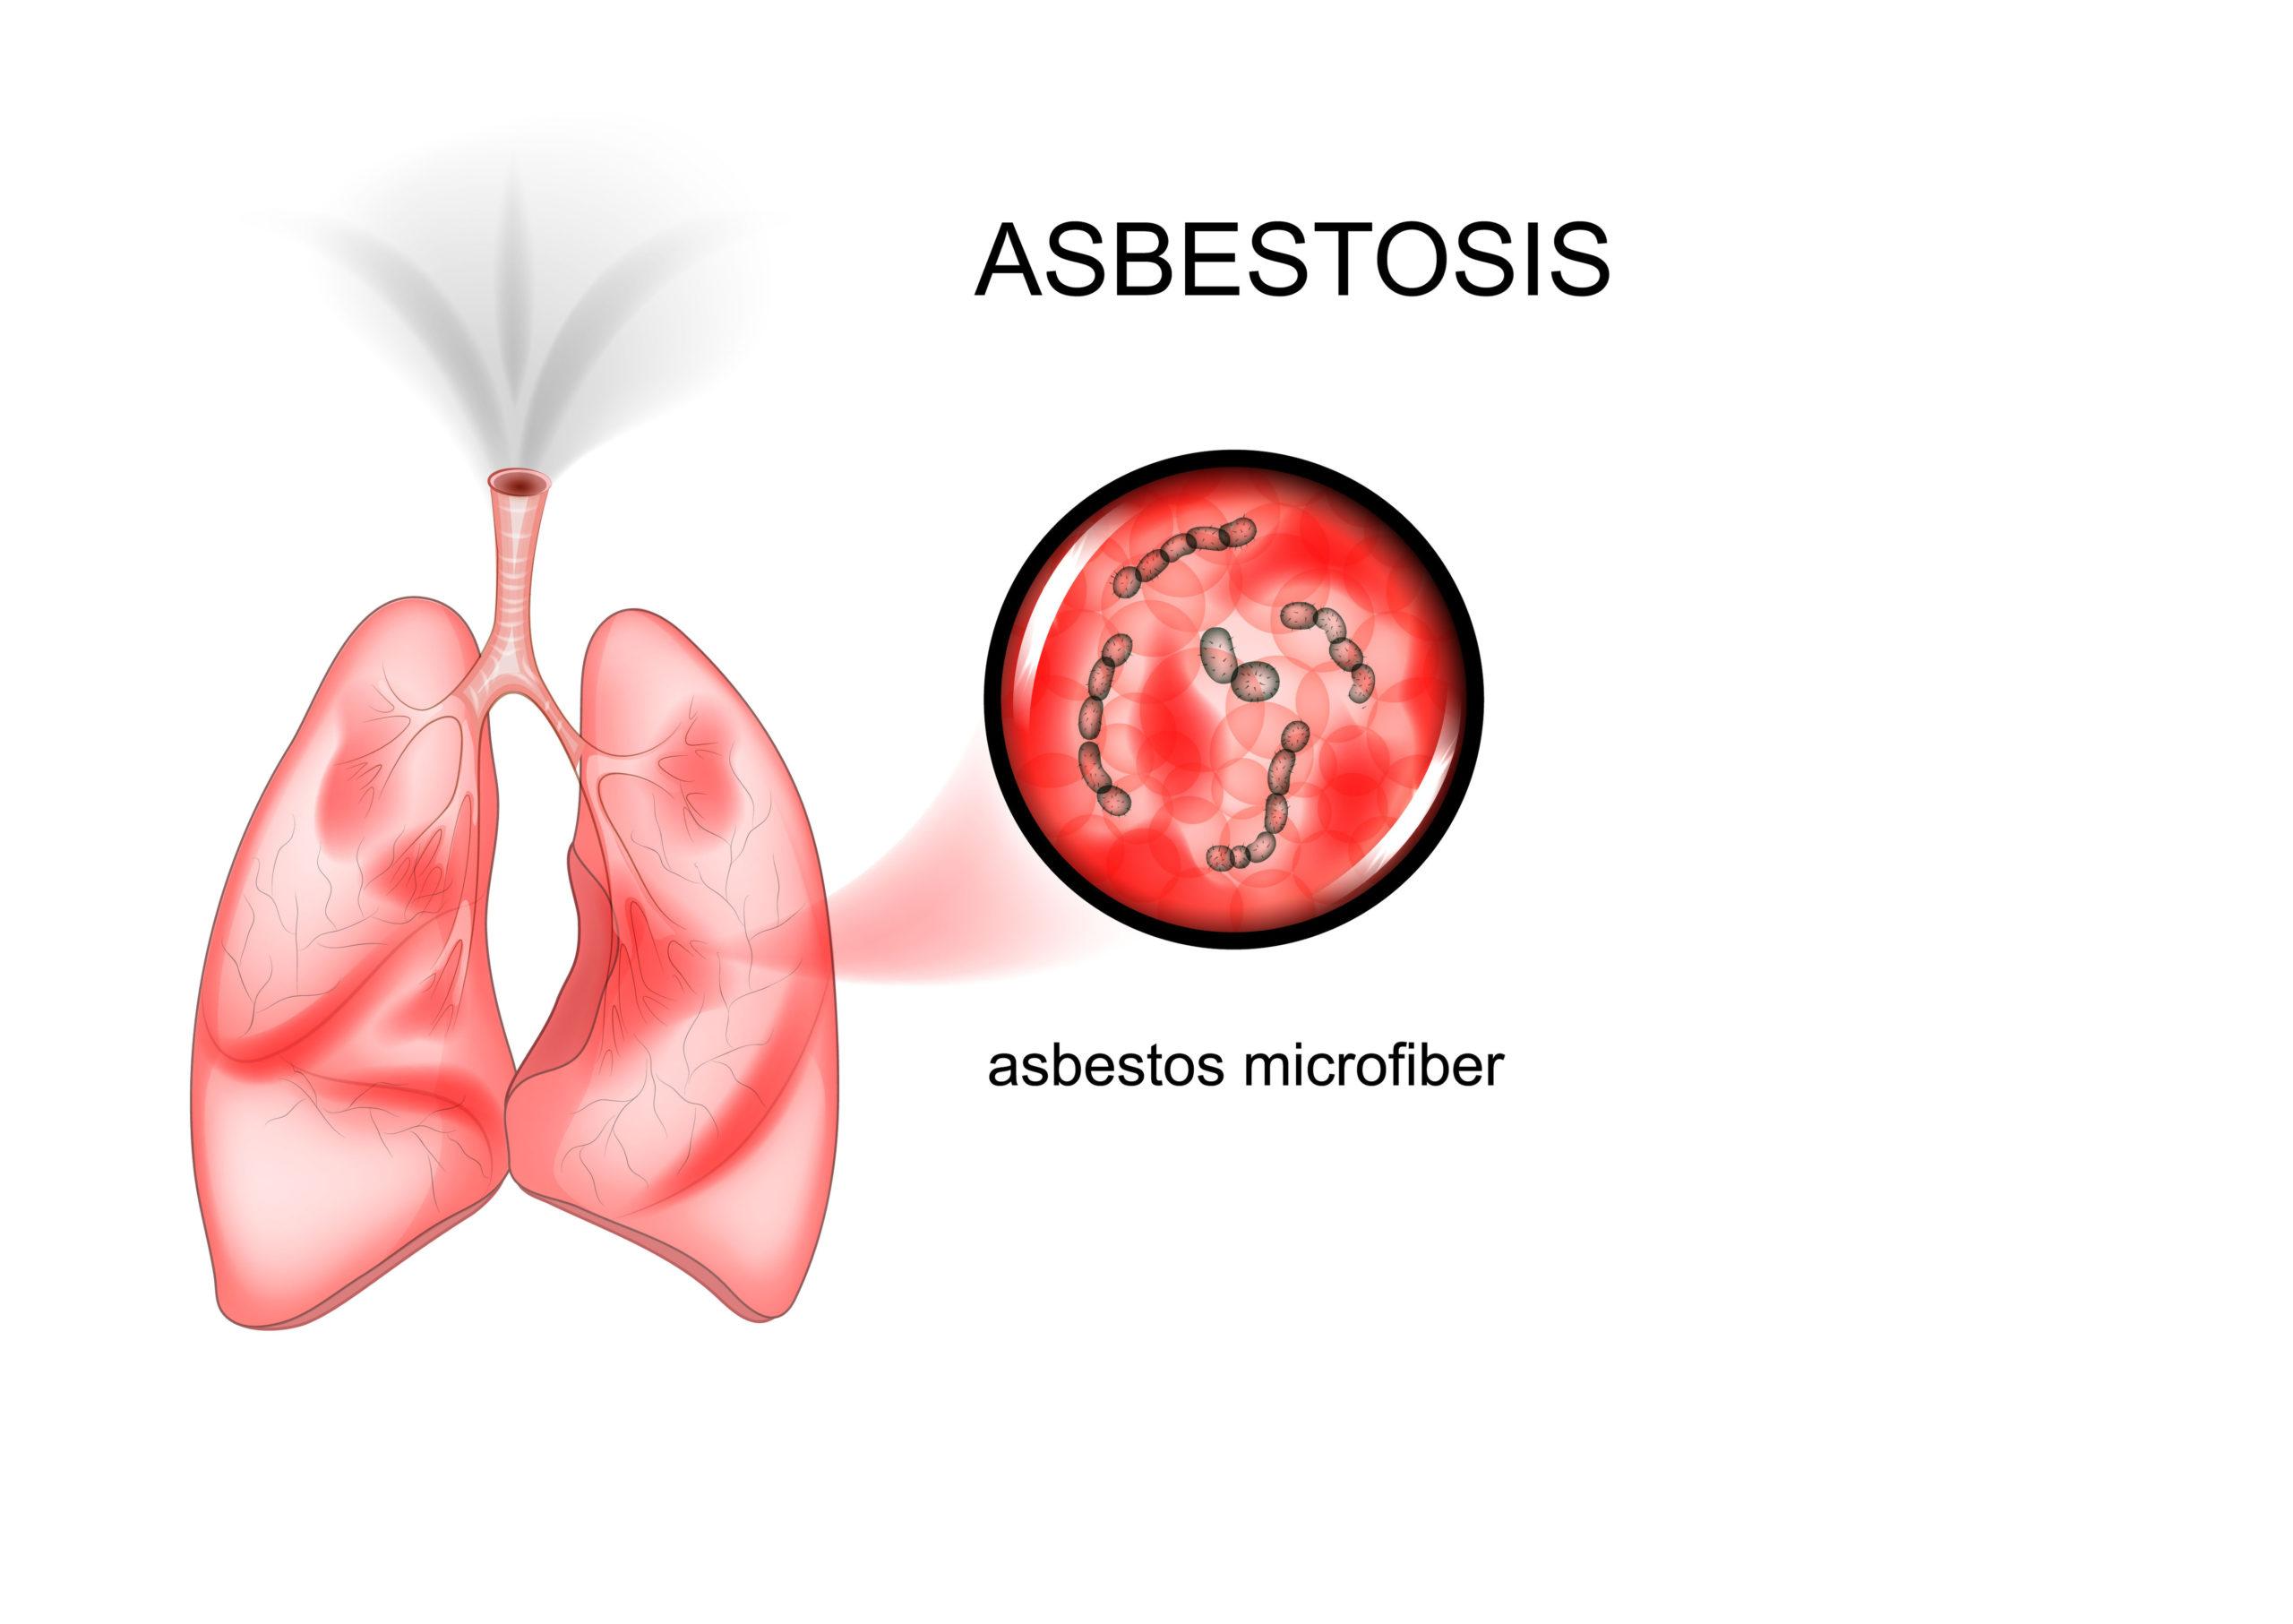 Can asbestos cause lung nodules